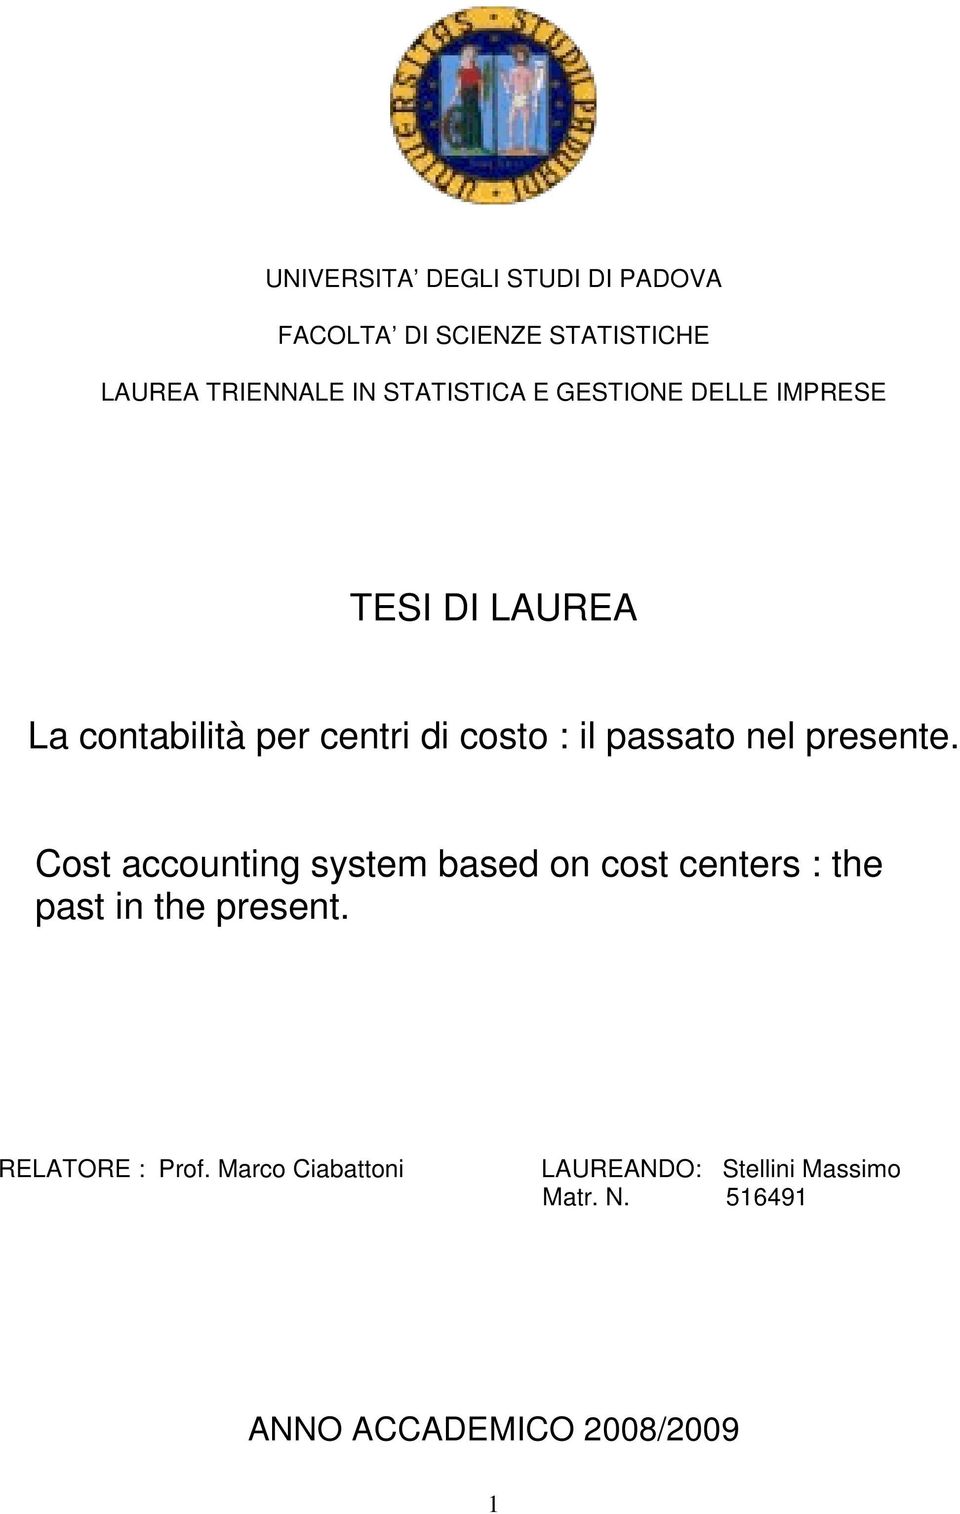 passato nel presente. Cost accounting system based on cost centers : the past in the present.